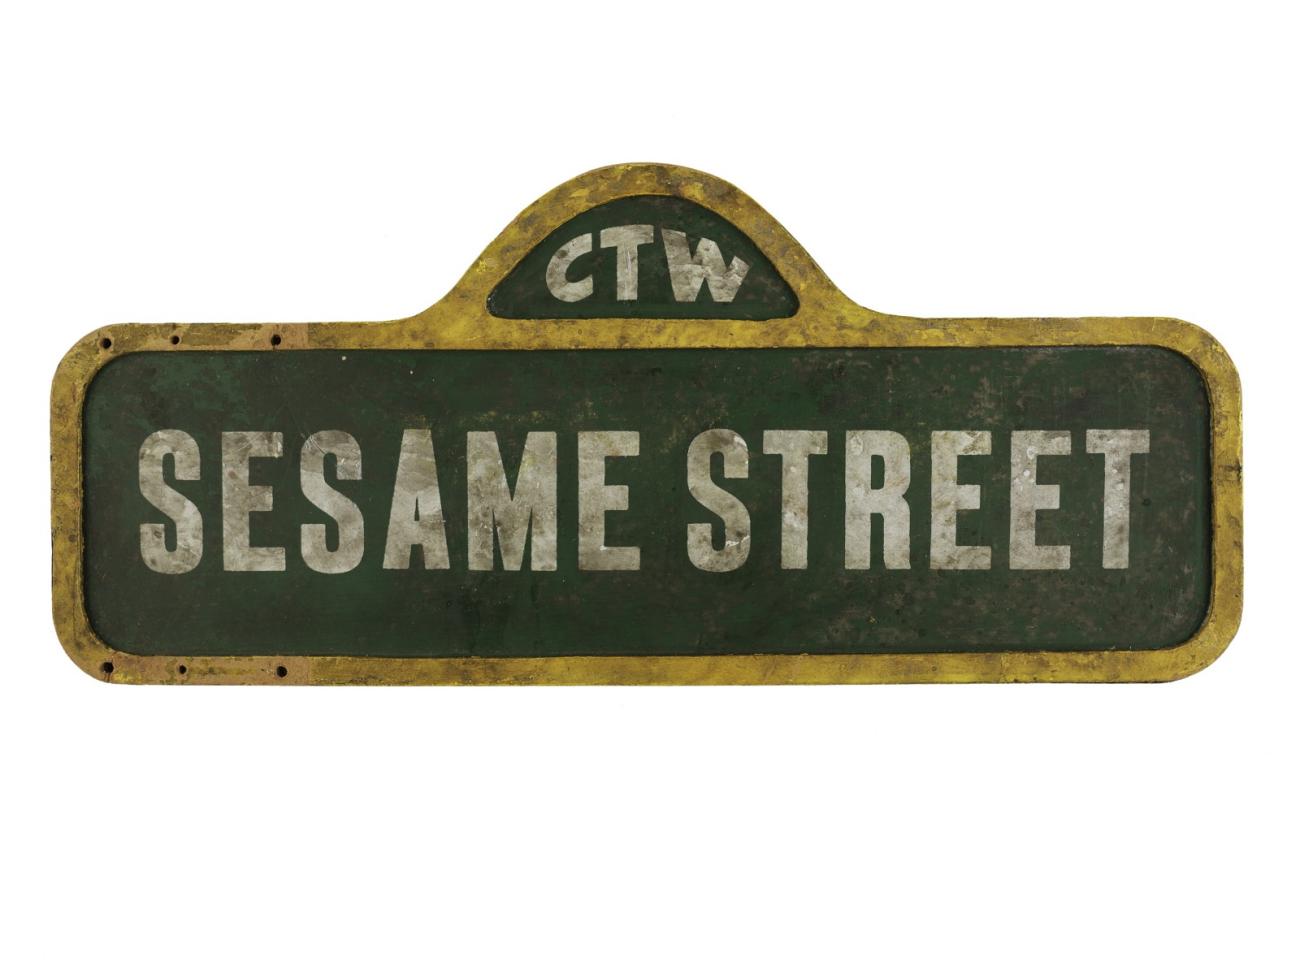 Sesame Street Sign from National Museum of American History